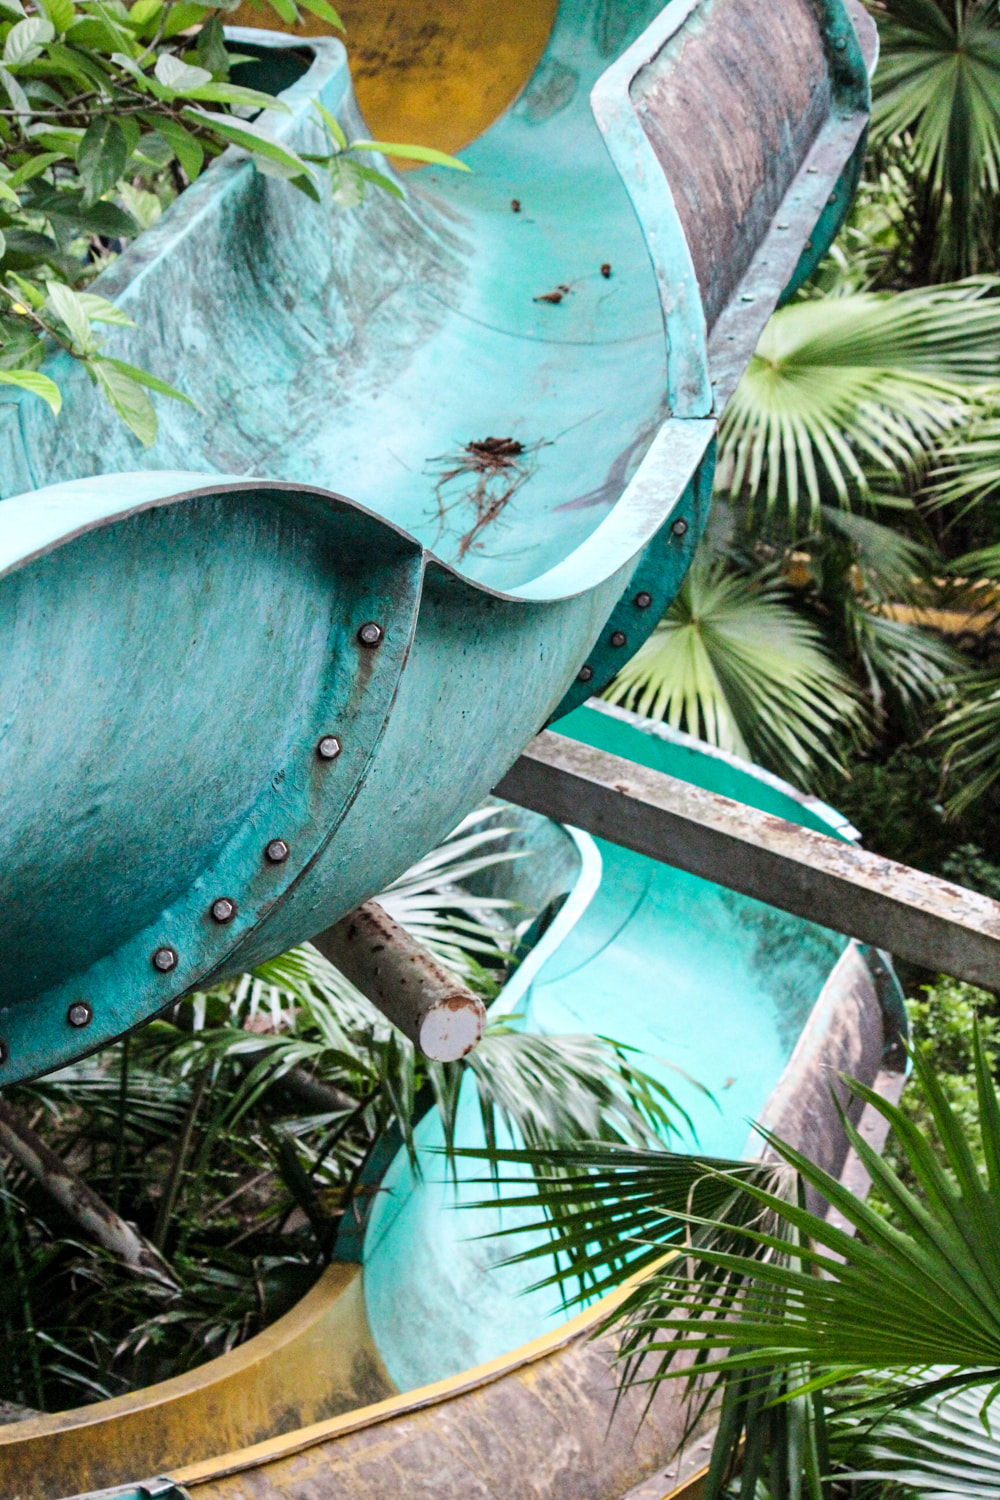 Detail of one of the larger windy water slides // Hue: Ho Thuy Tien, Photos of Vietnam's Abandoned Water Park.